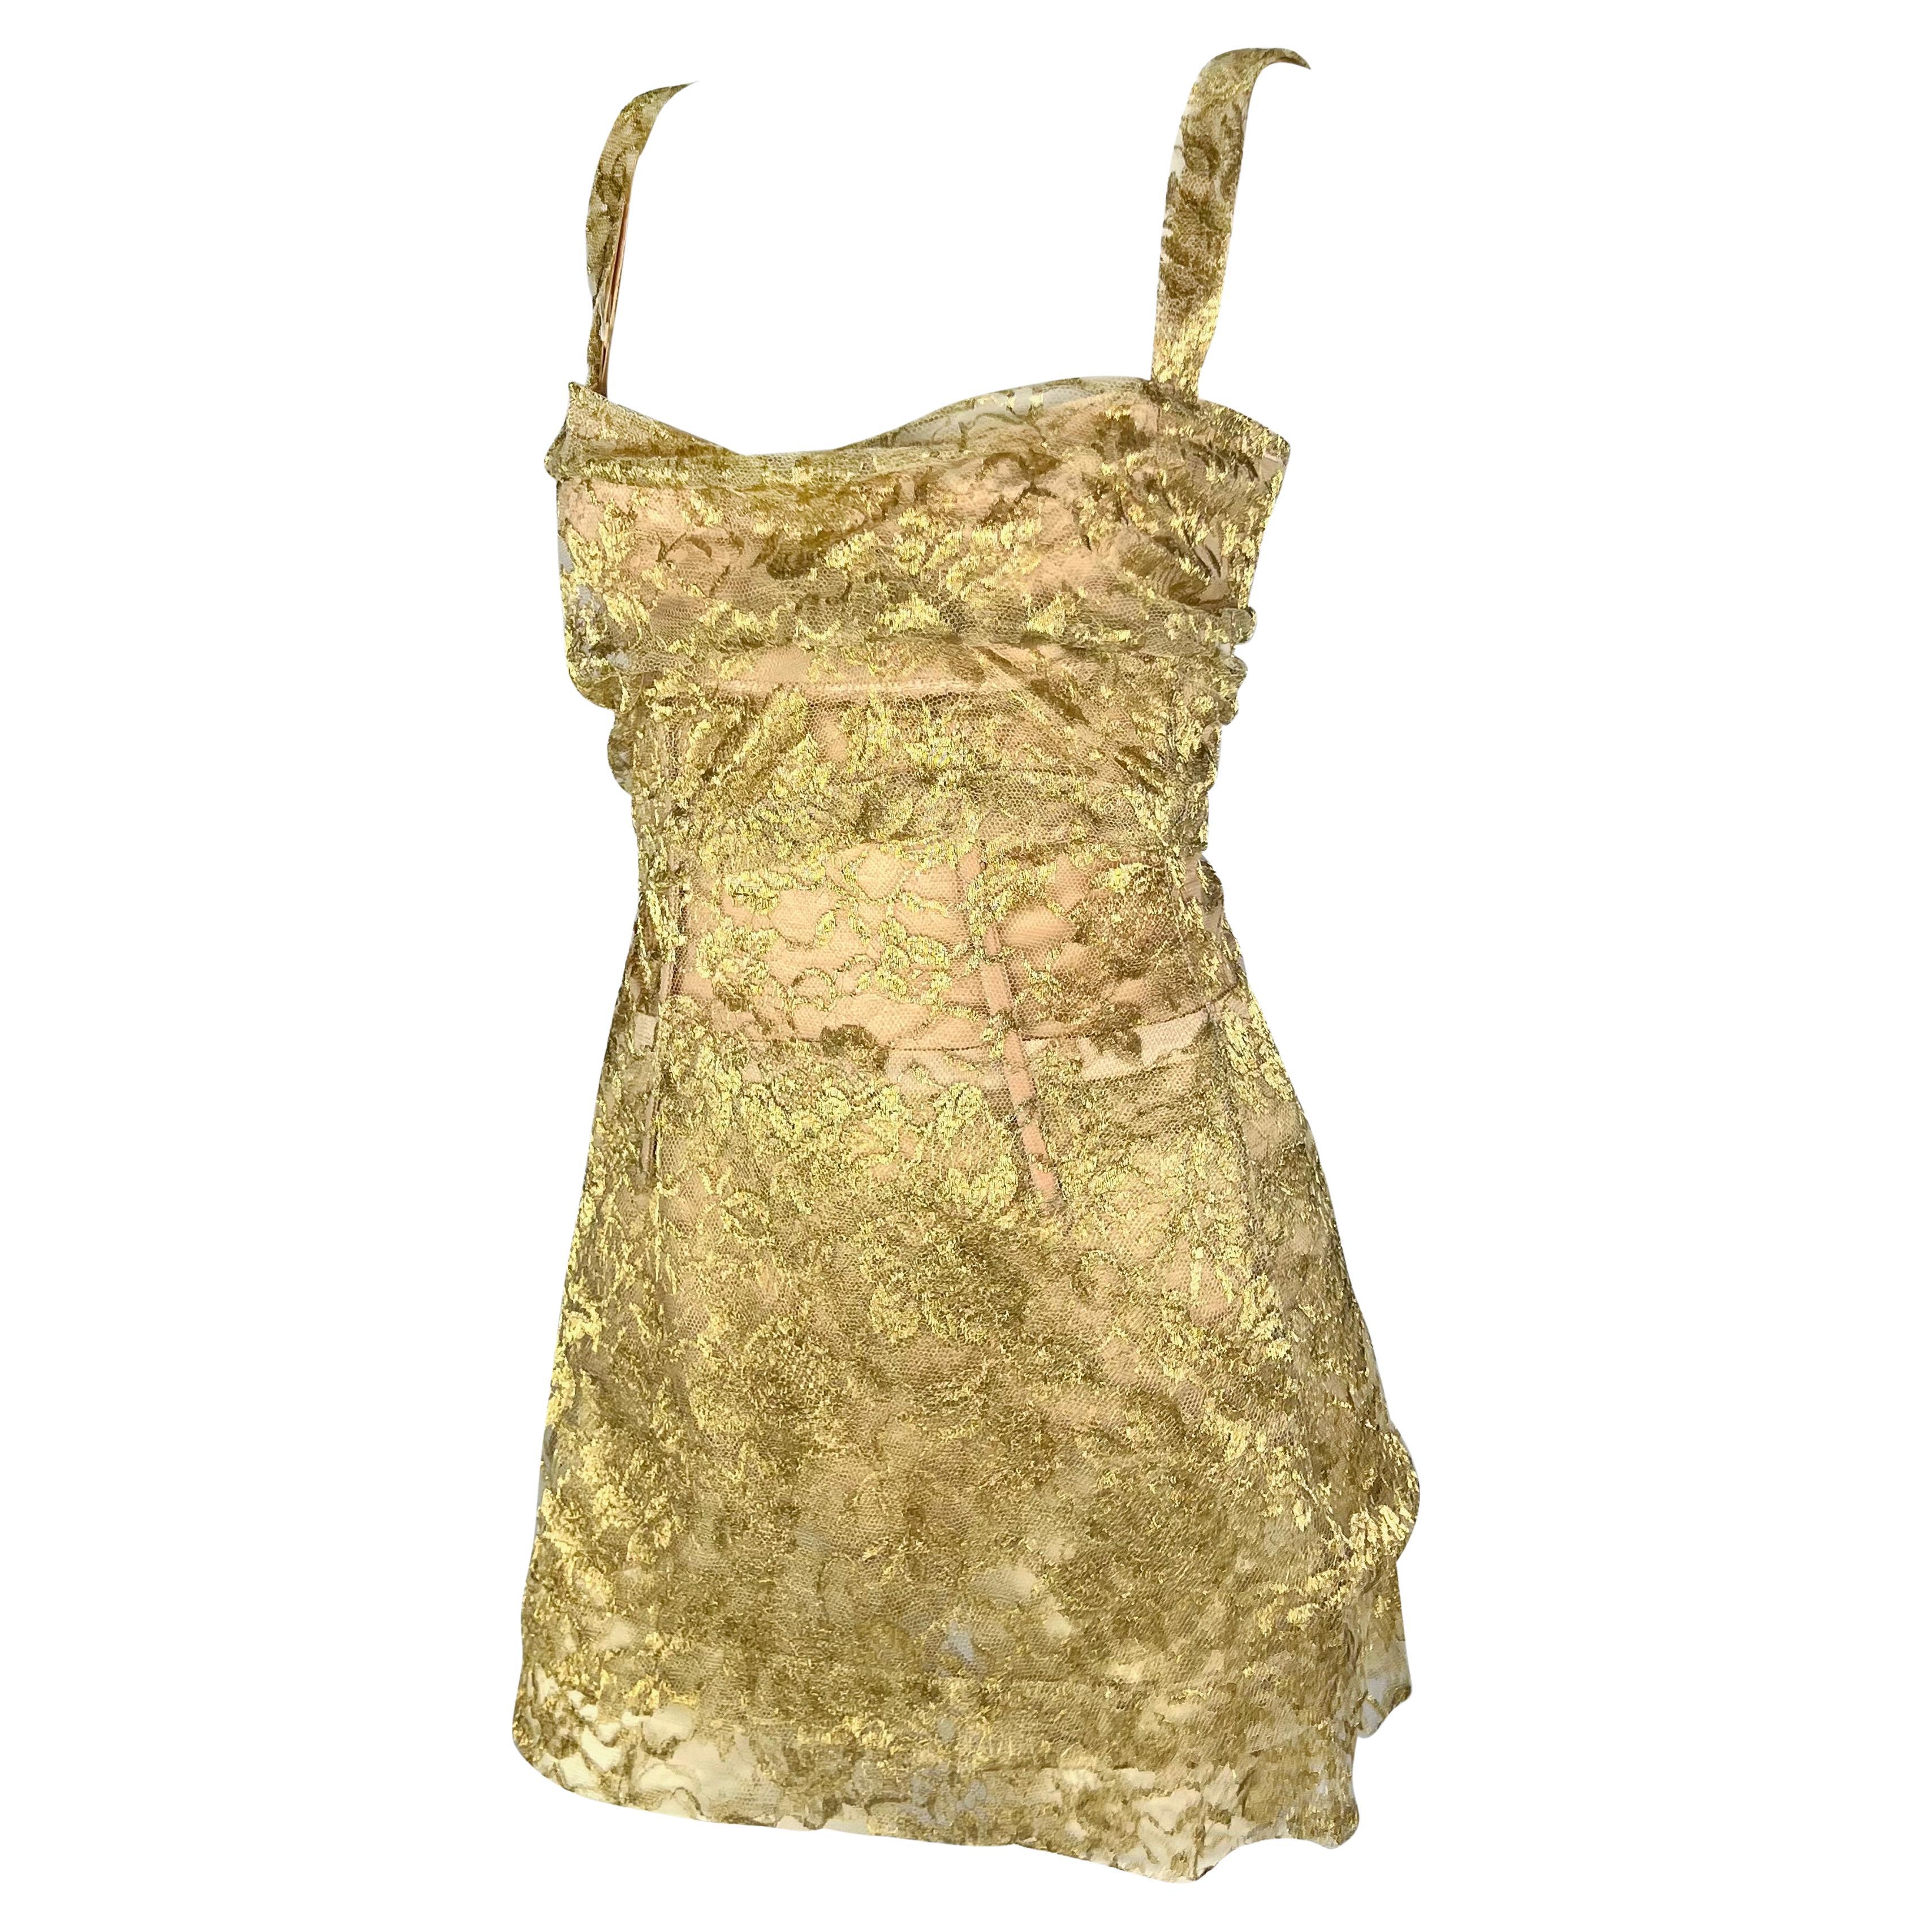 From the Fall/Winter 1996 collection, fabric-wrapped bodysuits akin to this gold lace-covered Dolce & Gabbana dress made their debut on the season's runway. This dress stands out as the ultimate party attire. Its ultra-mini length, thin straps, and